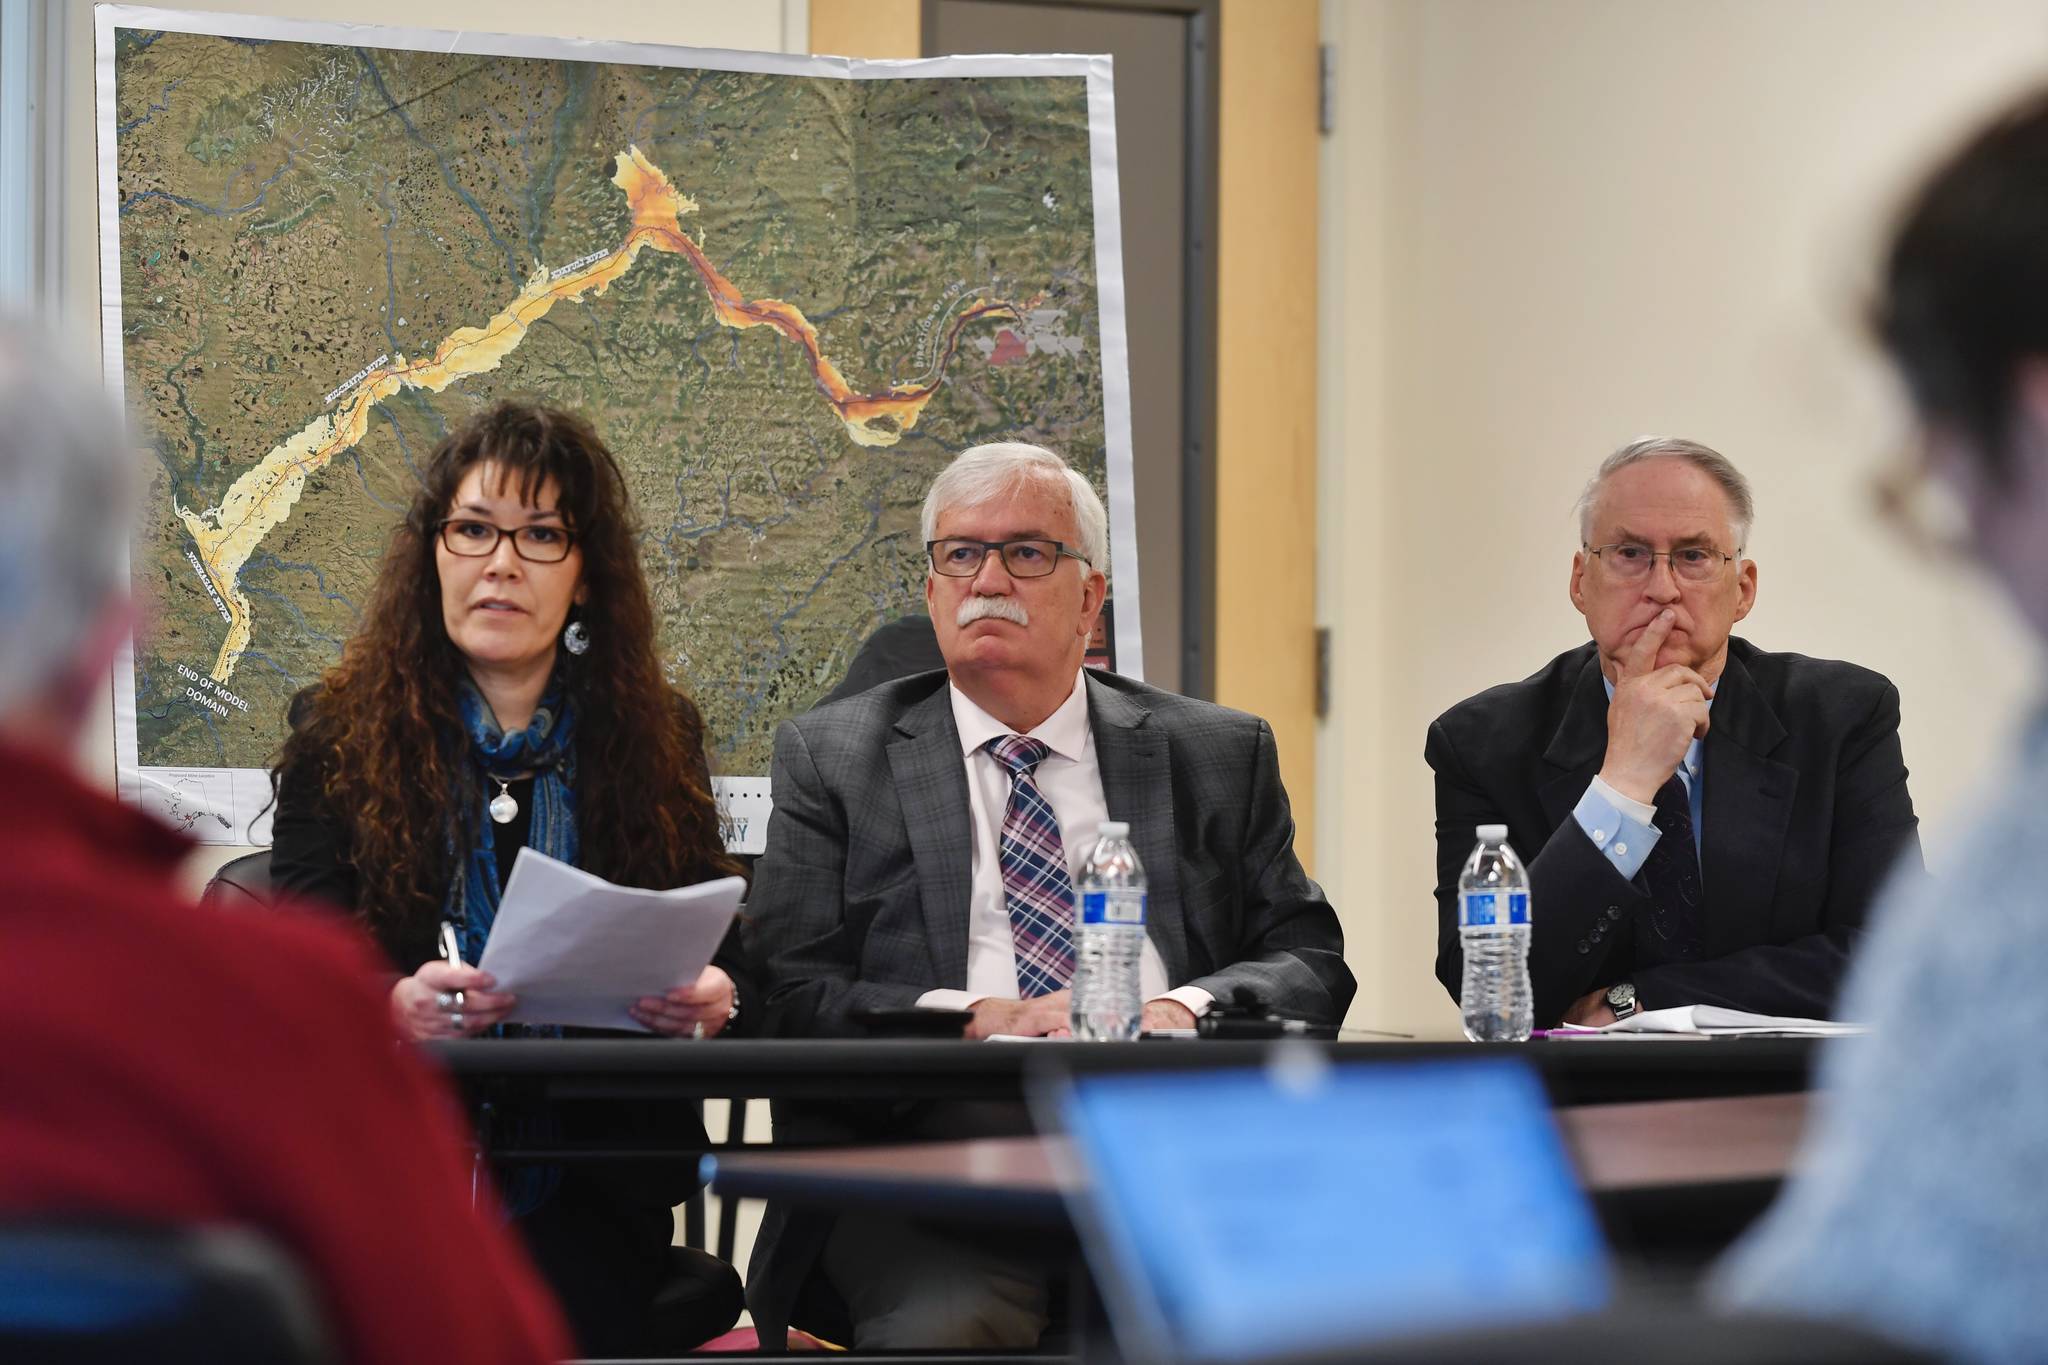 Gayla Hoseth, 2nd Chief of Curyung Tribal Council and Director of Natural Resources at Bristol Bay Native Association, left, Norman Van Vactor, CEO of the Bristol Bay Economic Development Corporation, center, and former Alaska legislator Rick Halford, present at a press conference against thePebble Mine project on Monday, April 1, 2019. (Michael Penn | Juneau Empire)